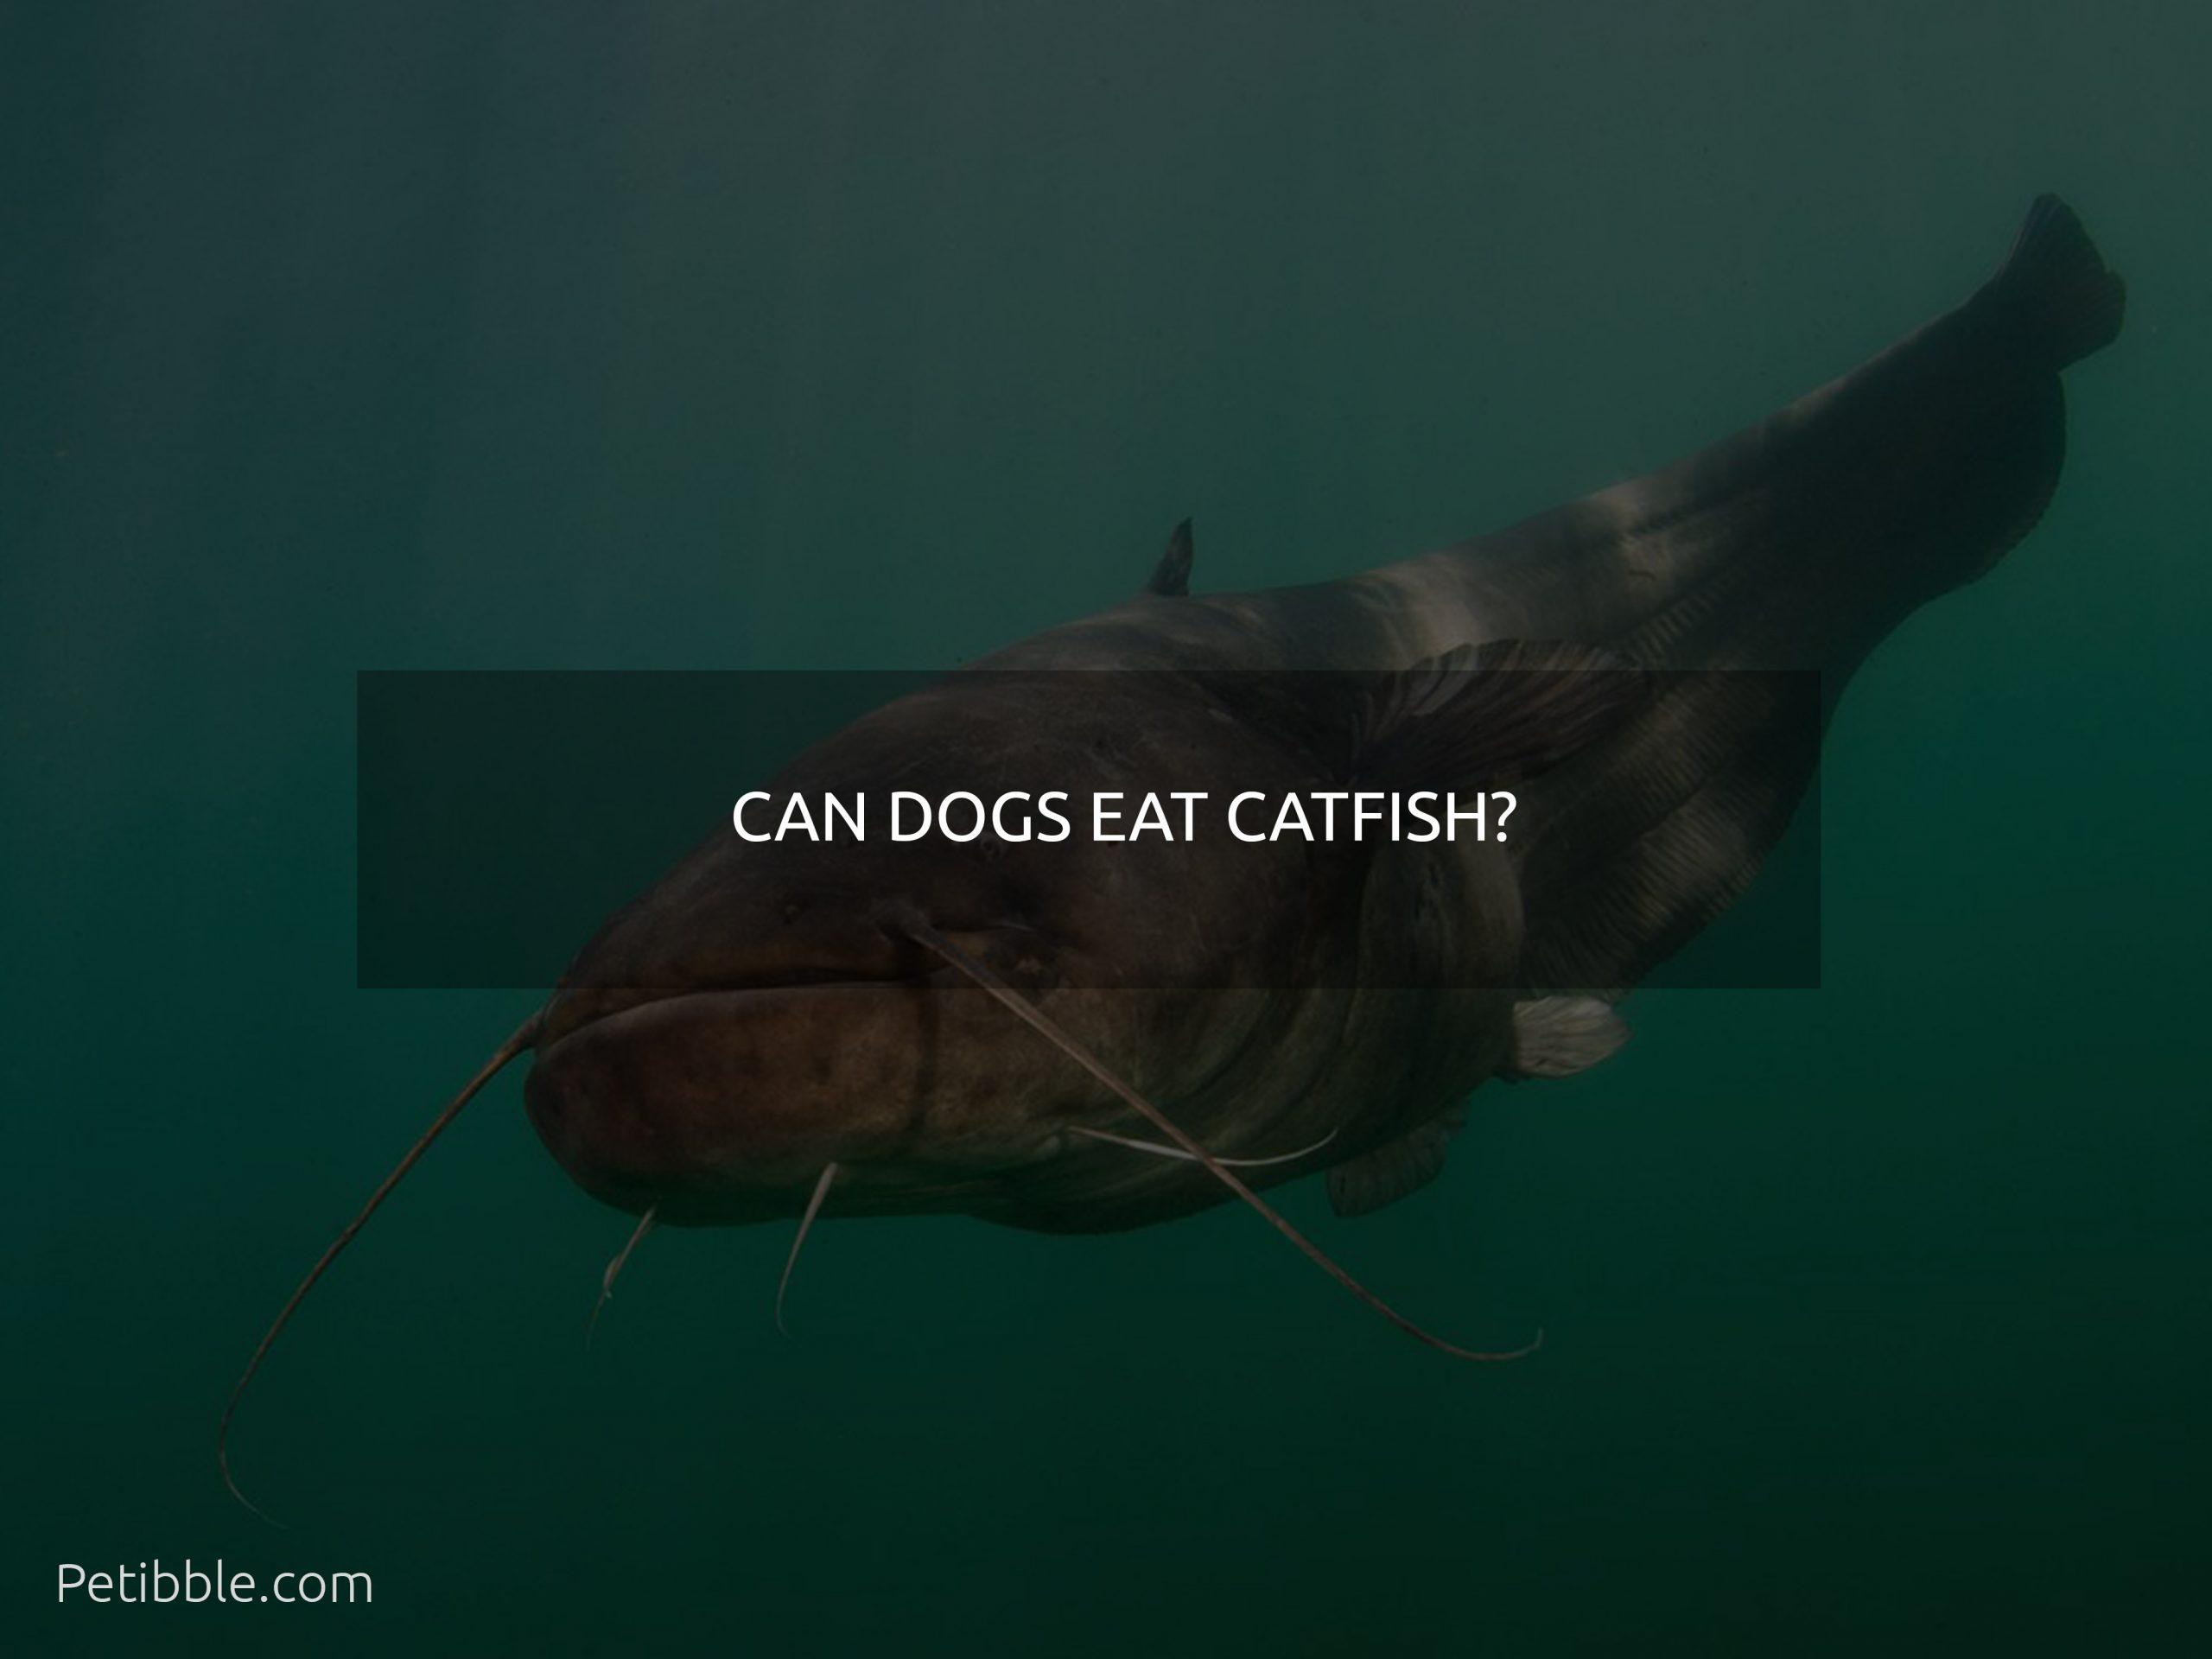 Can dogs eat Catfish?